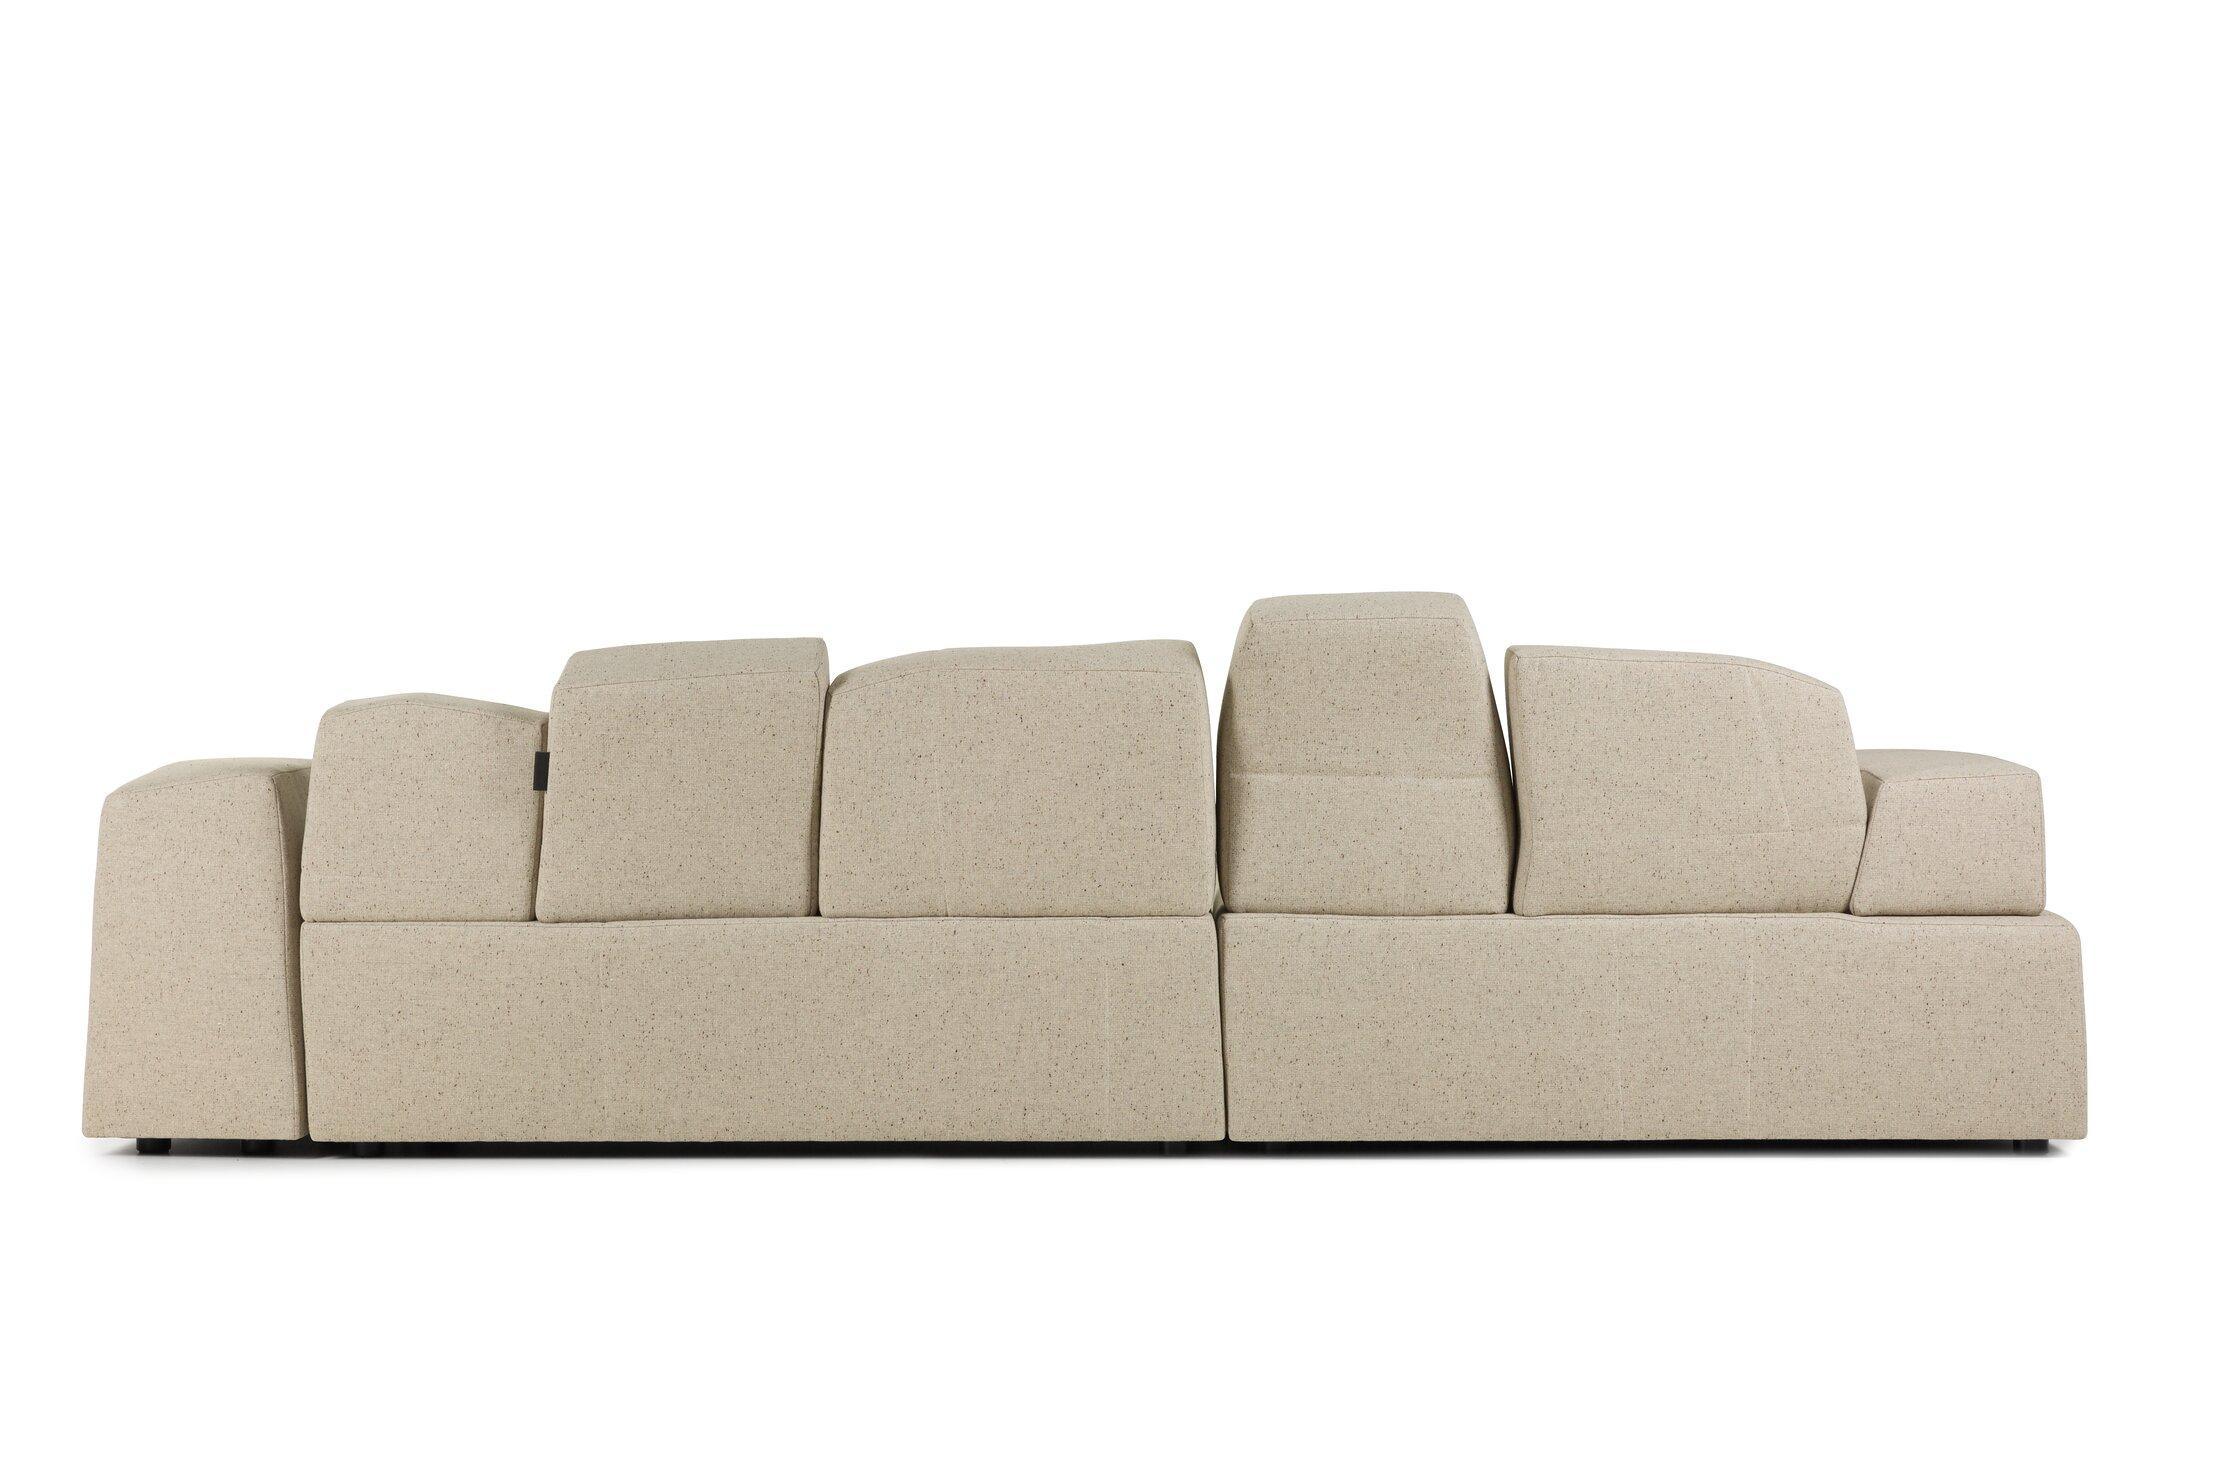 The something like this sofa is a celebration of the designer's love for sketchy drawings translated into a soft unusually modelled sofa.

Additional information:
Material: Wood and steel frame construction, foam
Upholstery: Solis, Paper - Cat